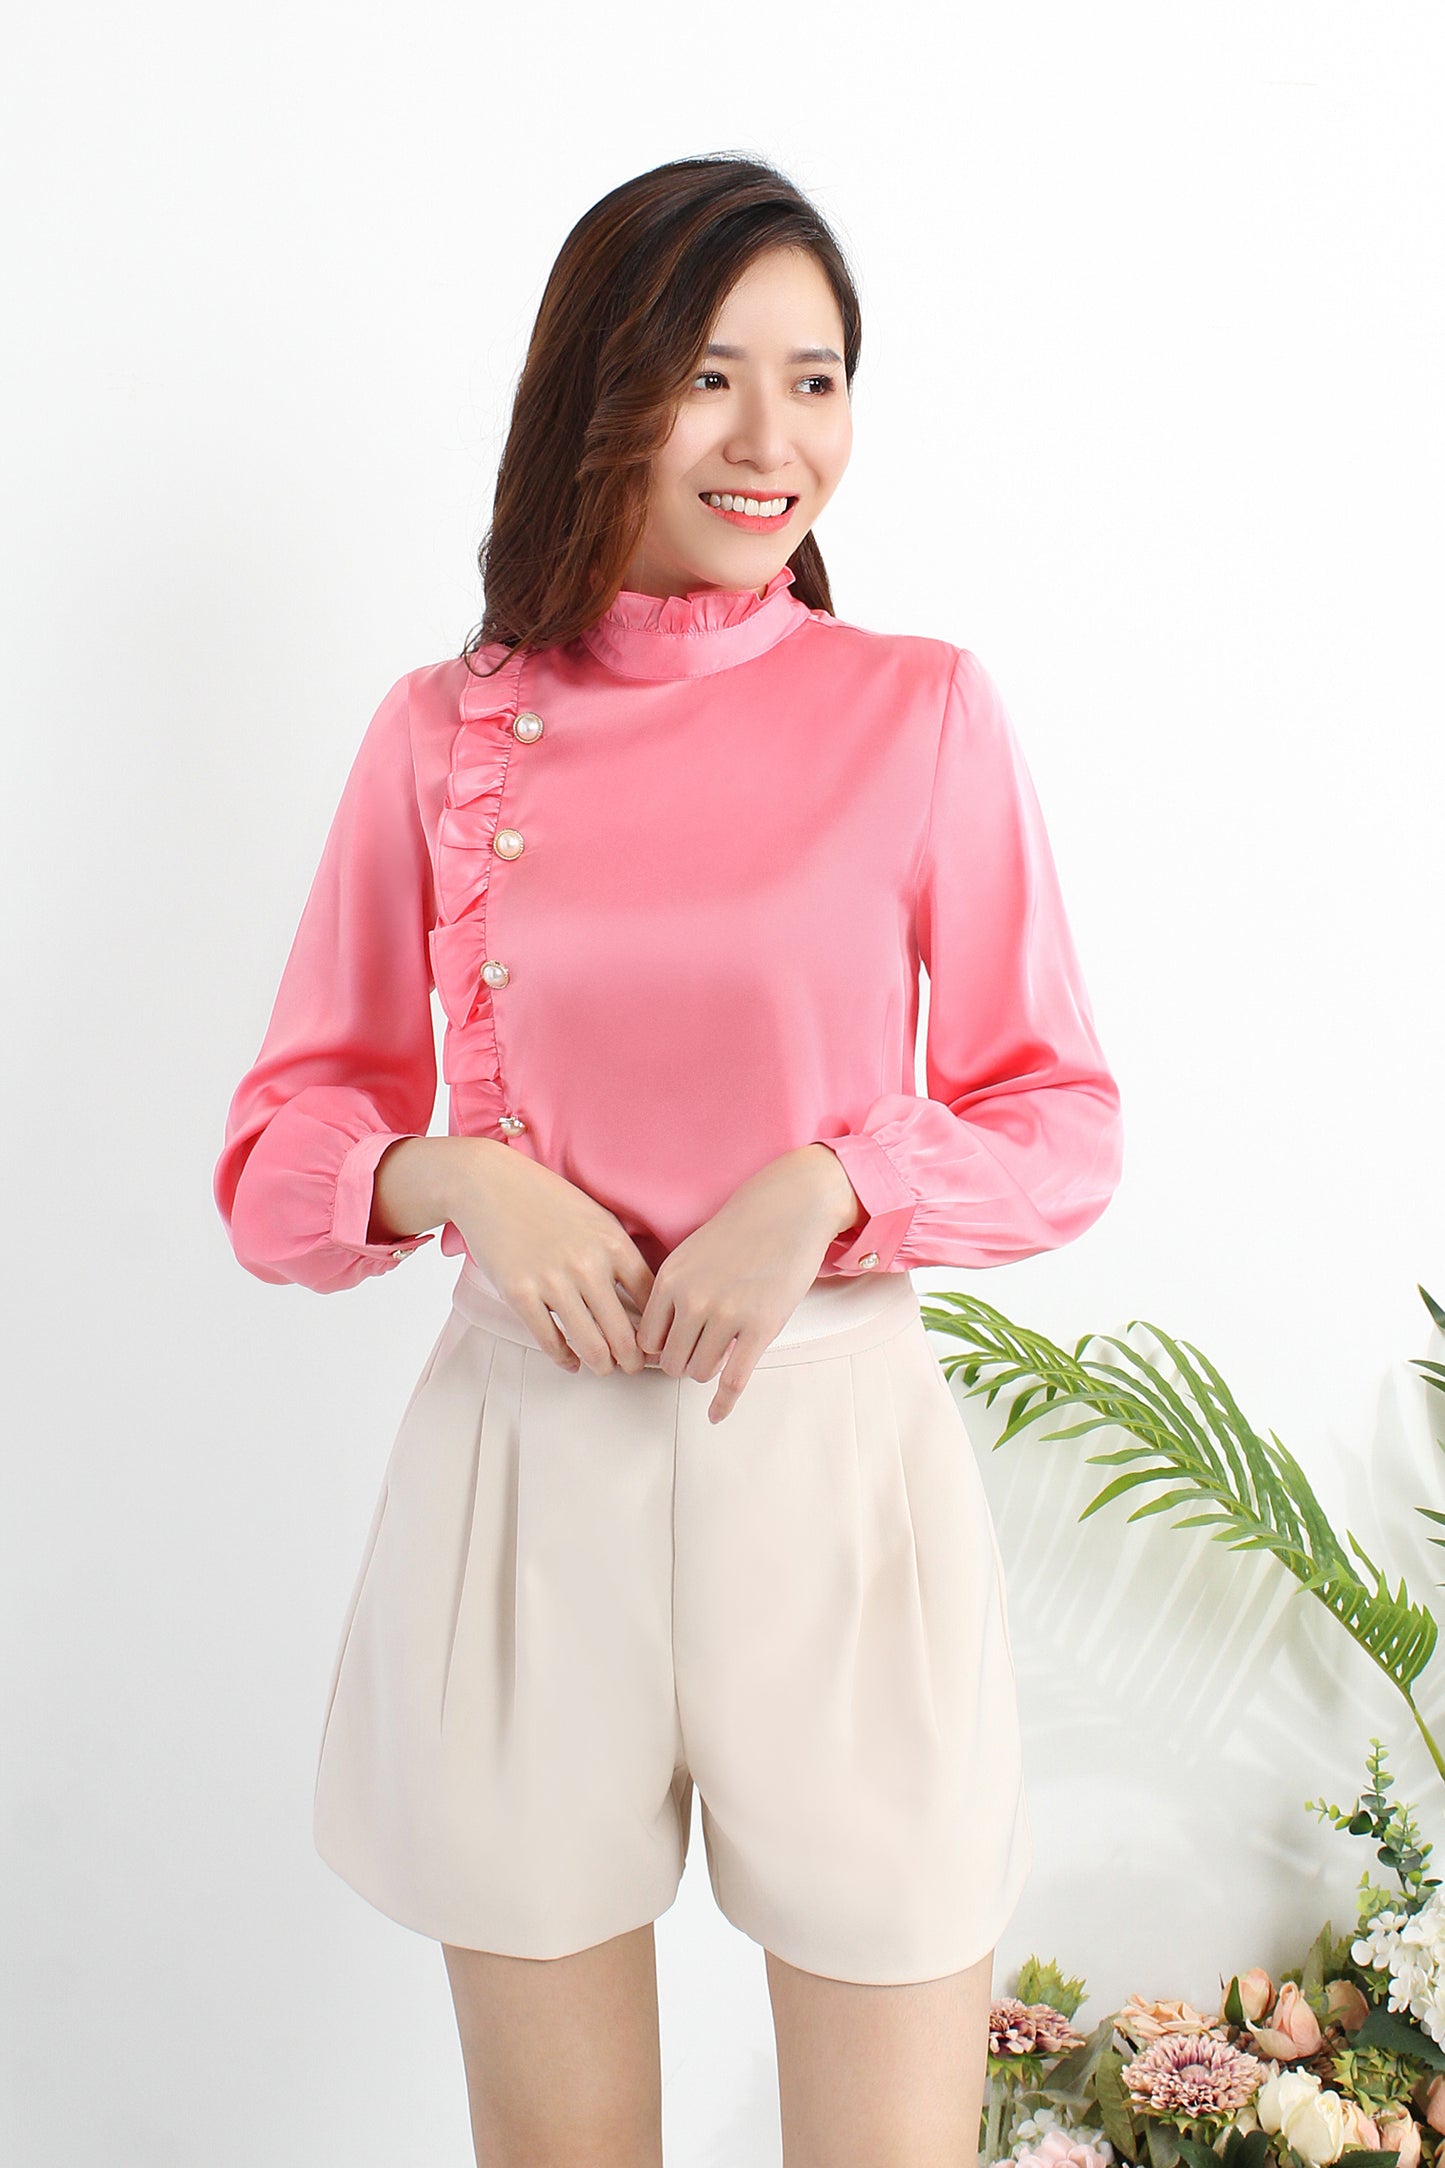 Asteria Ruffled Collar Blouse Embellished With Pearls